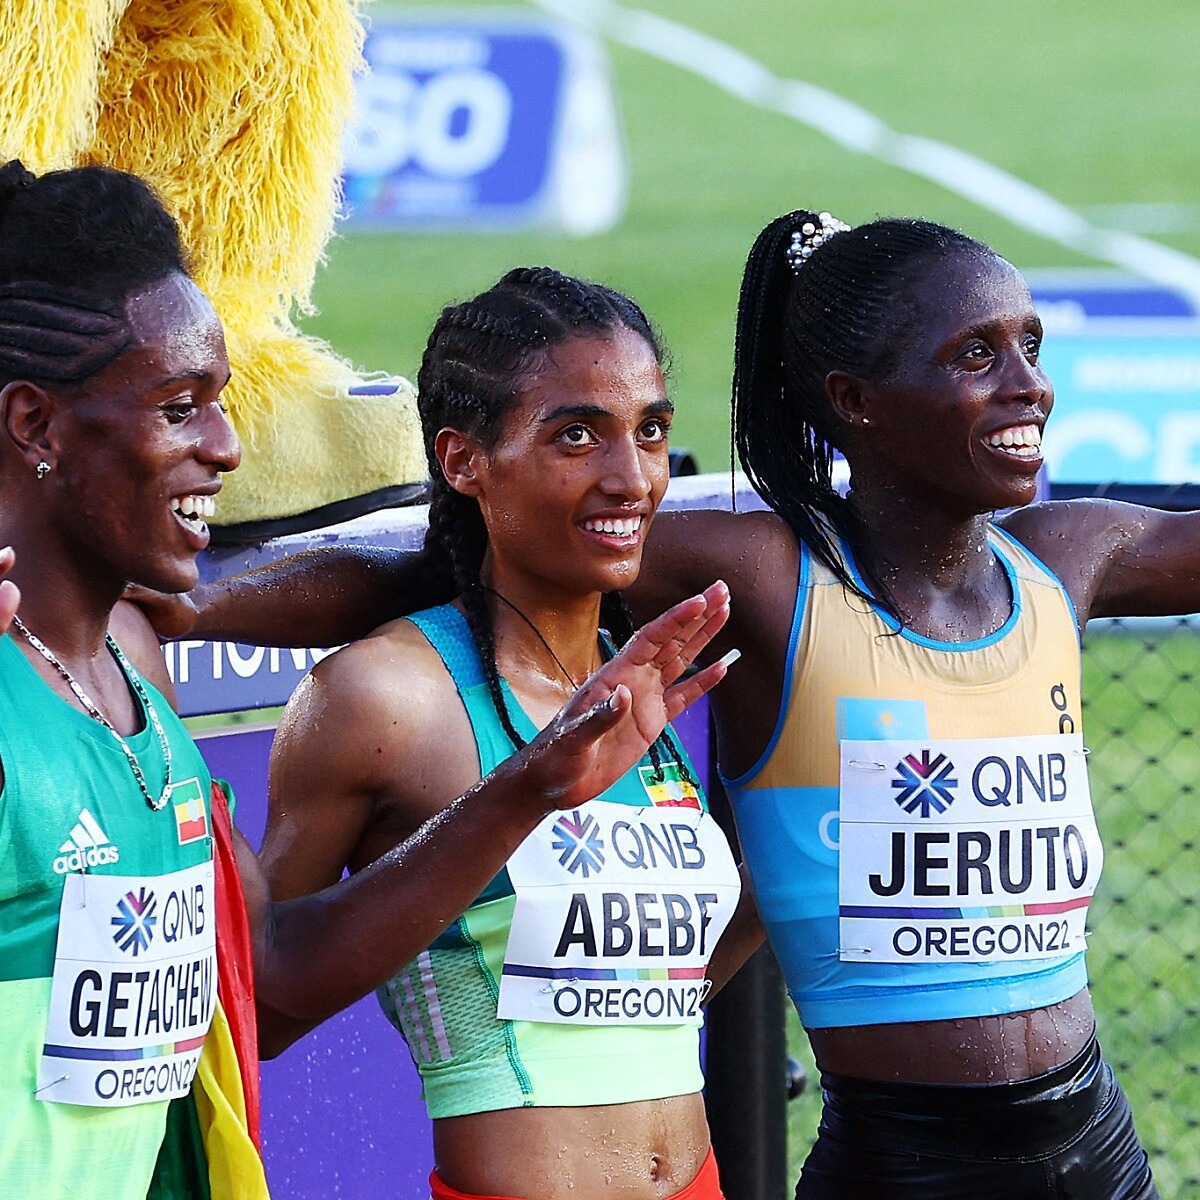 Getachew shatters Ethiopian record for World Steeplechase silver